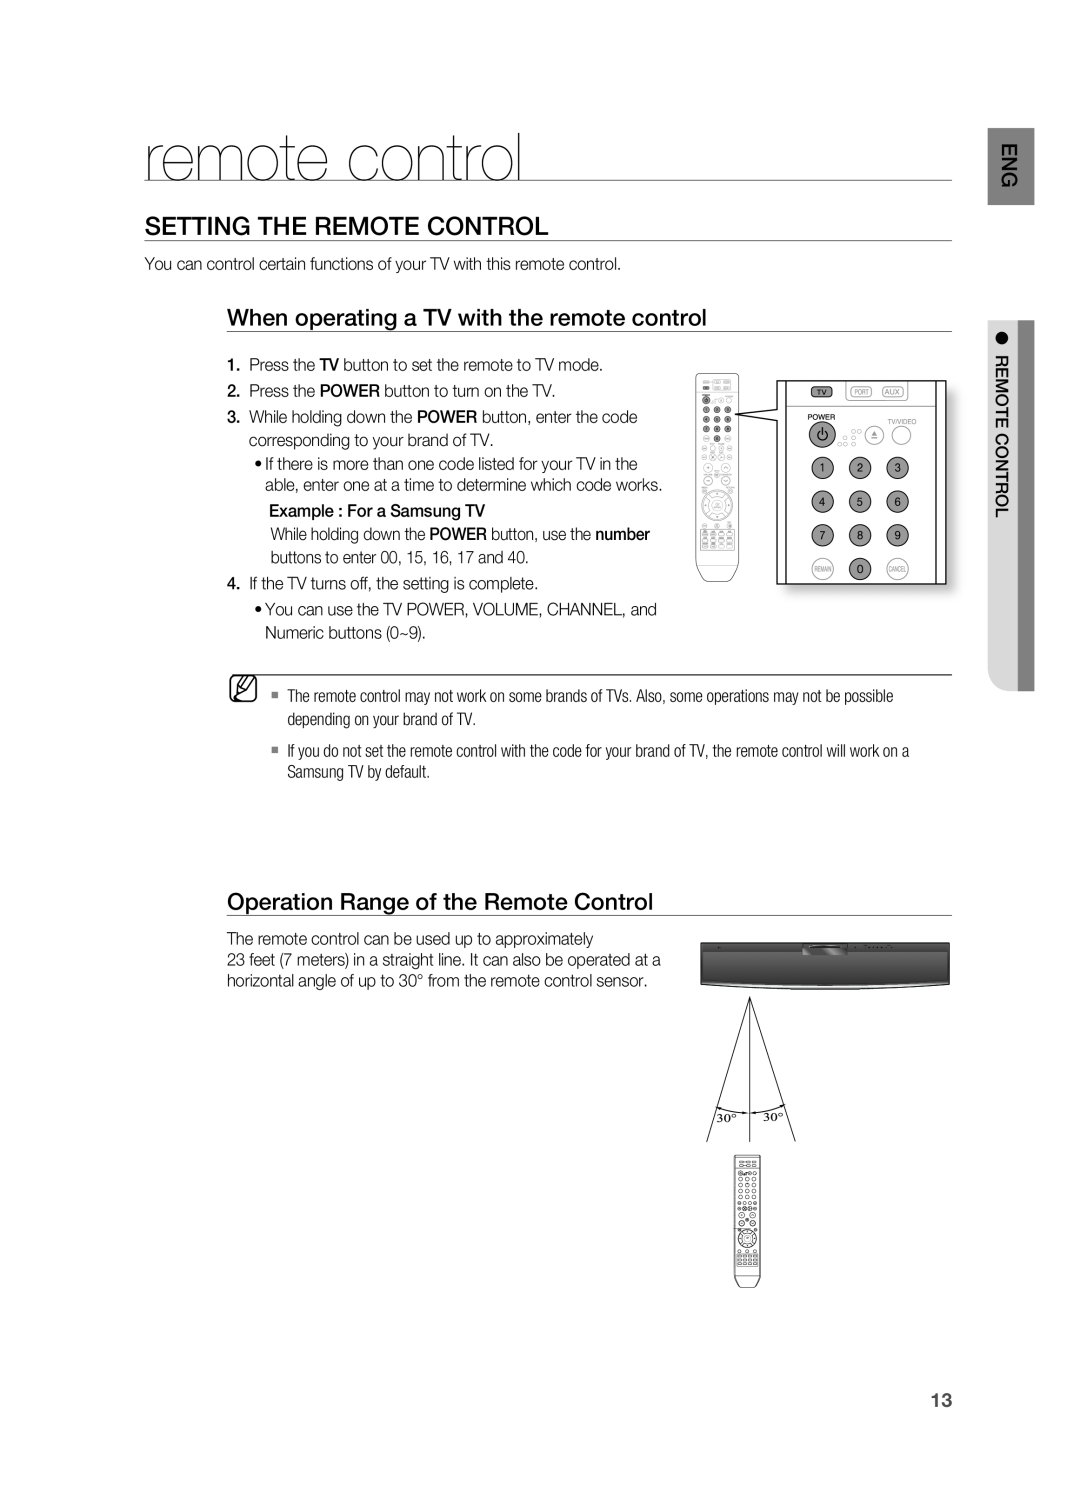 Sony HT-X810 user manual SETTING THE rEMOTE CONTrOl, When operating a TV with the remote control 